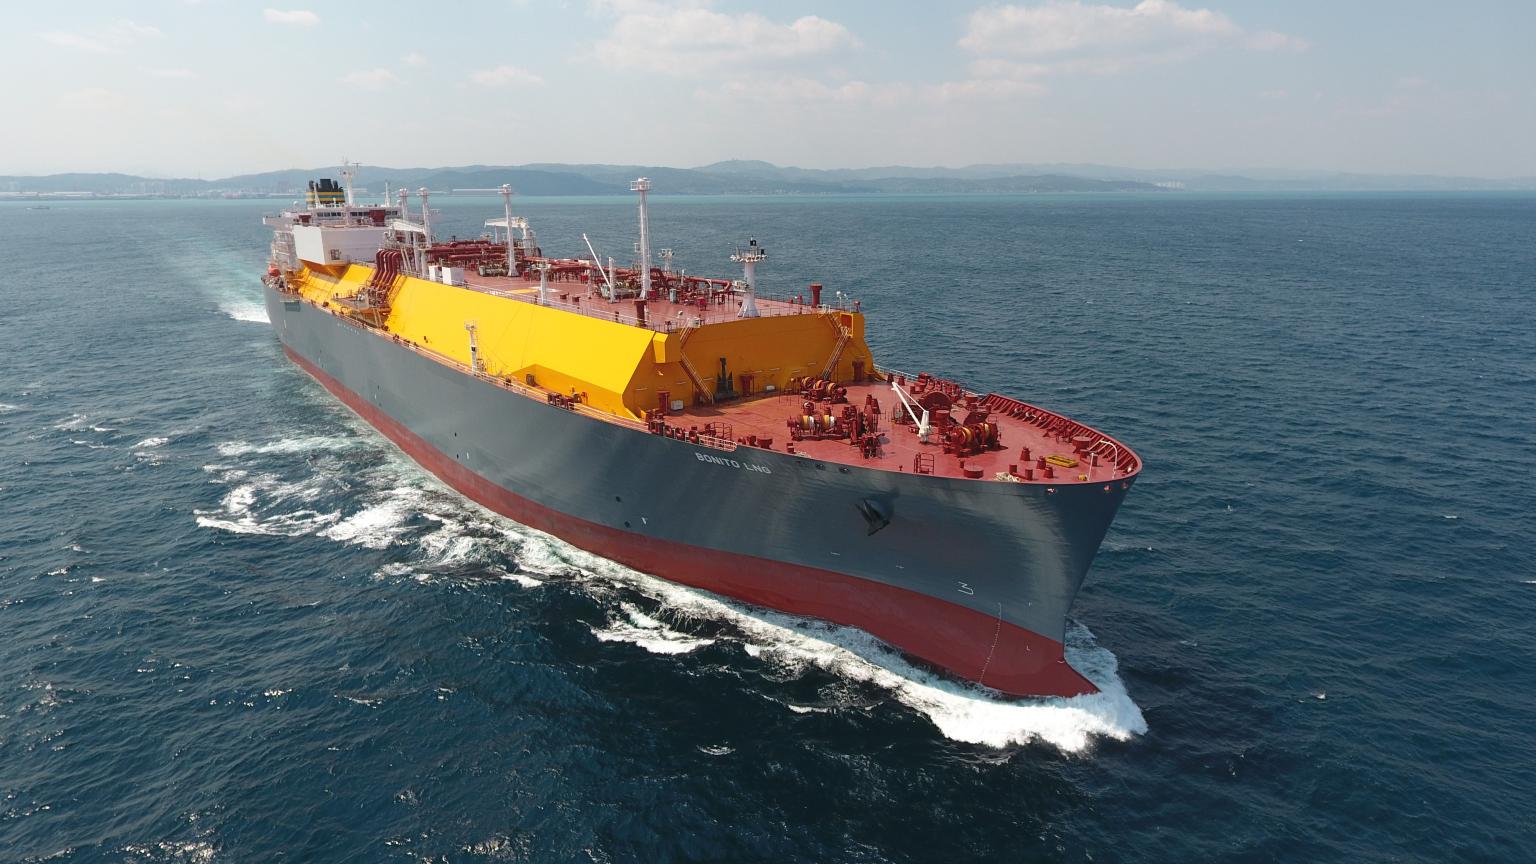 TMS Cardiff Gas takes delivery of another LNG carrier